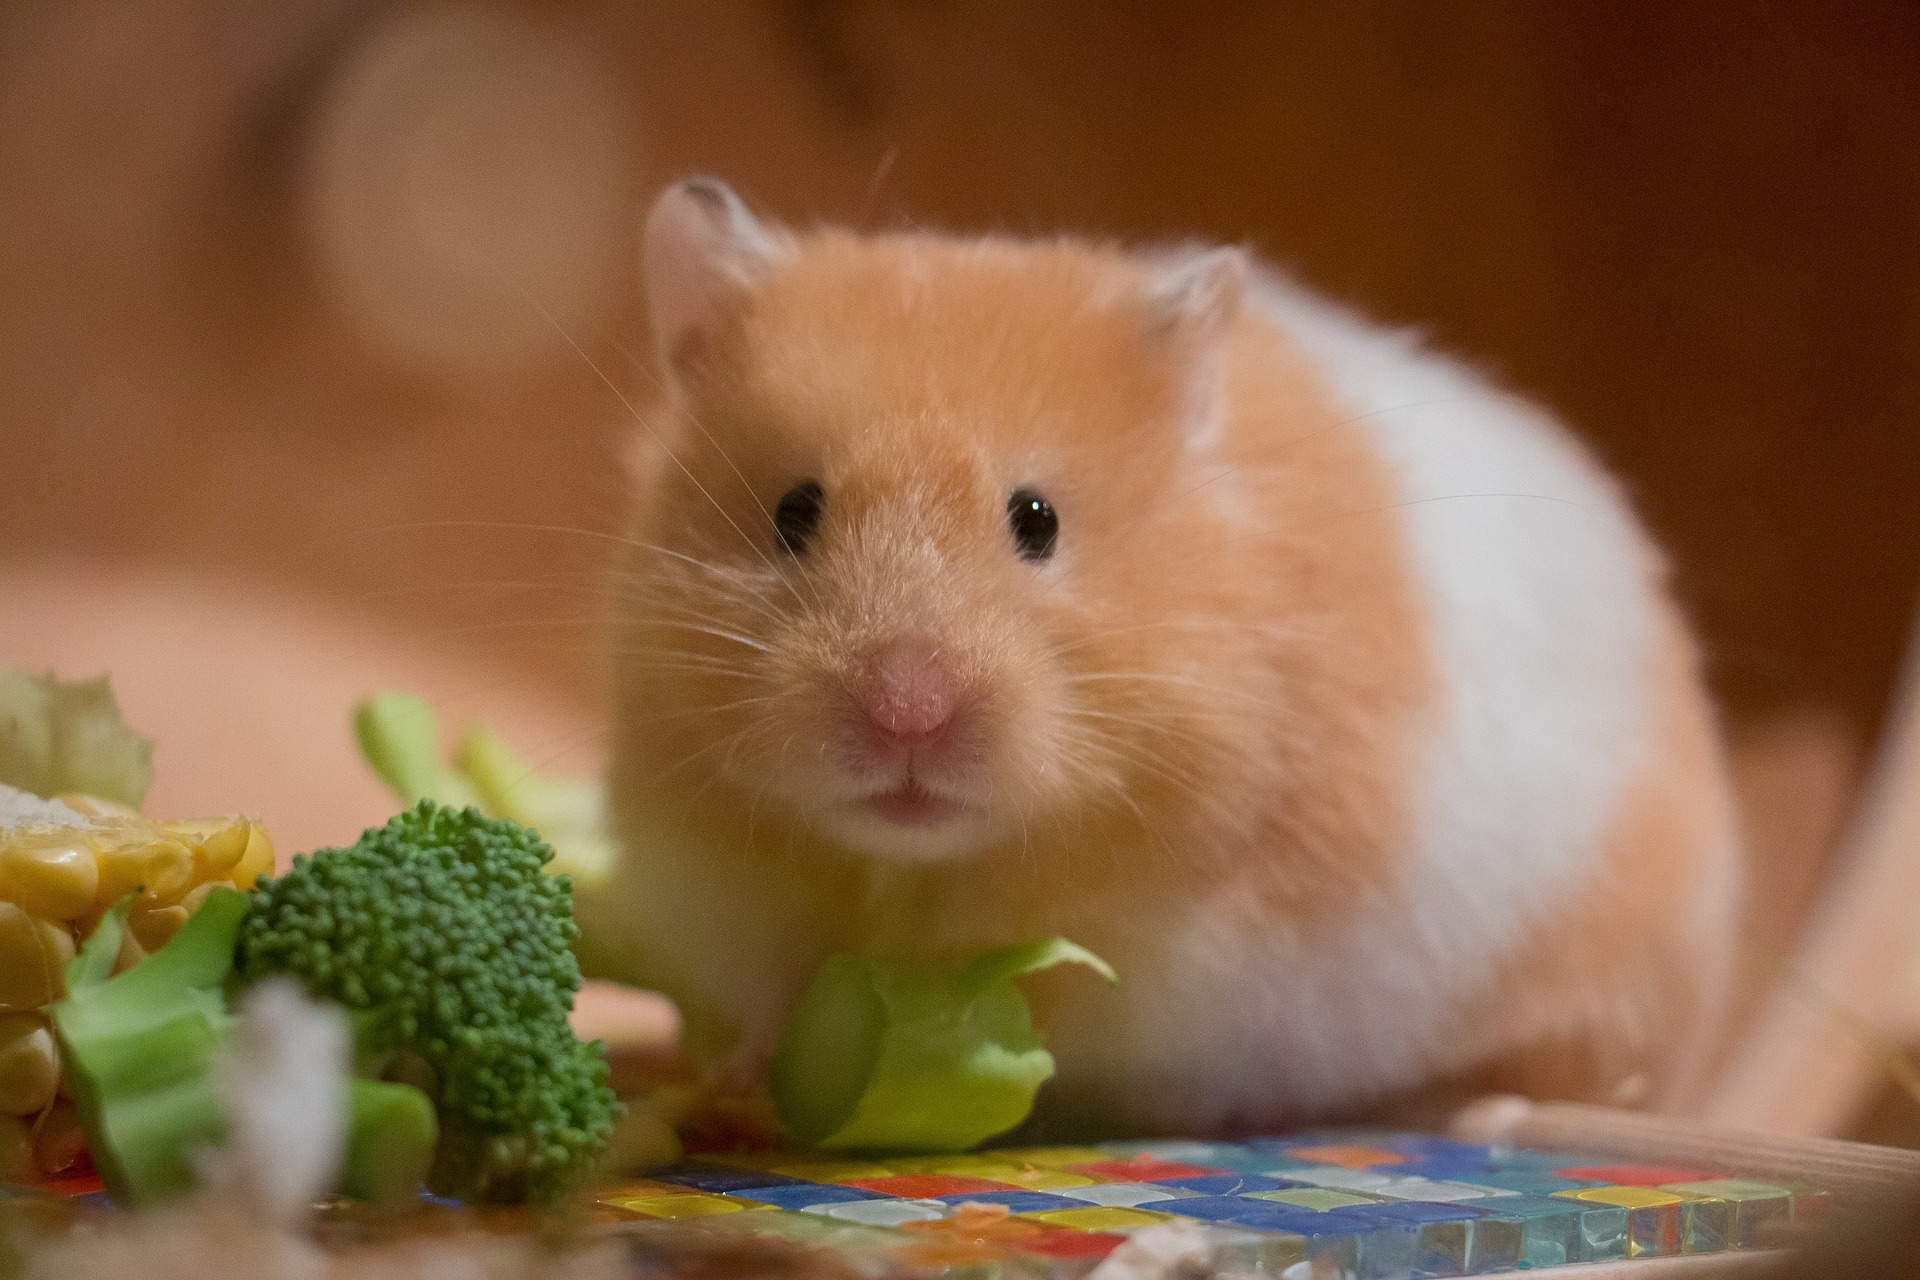 A brown and white hamster with half eaten broccoli in front of it.